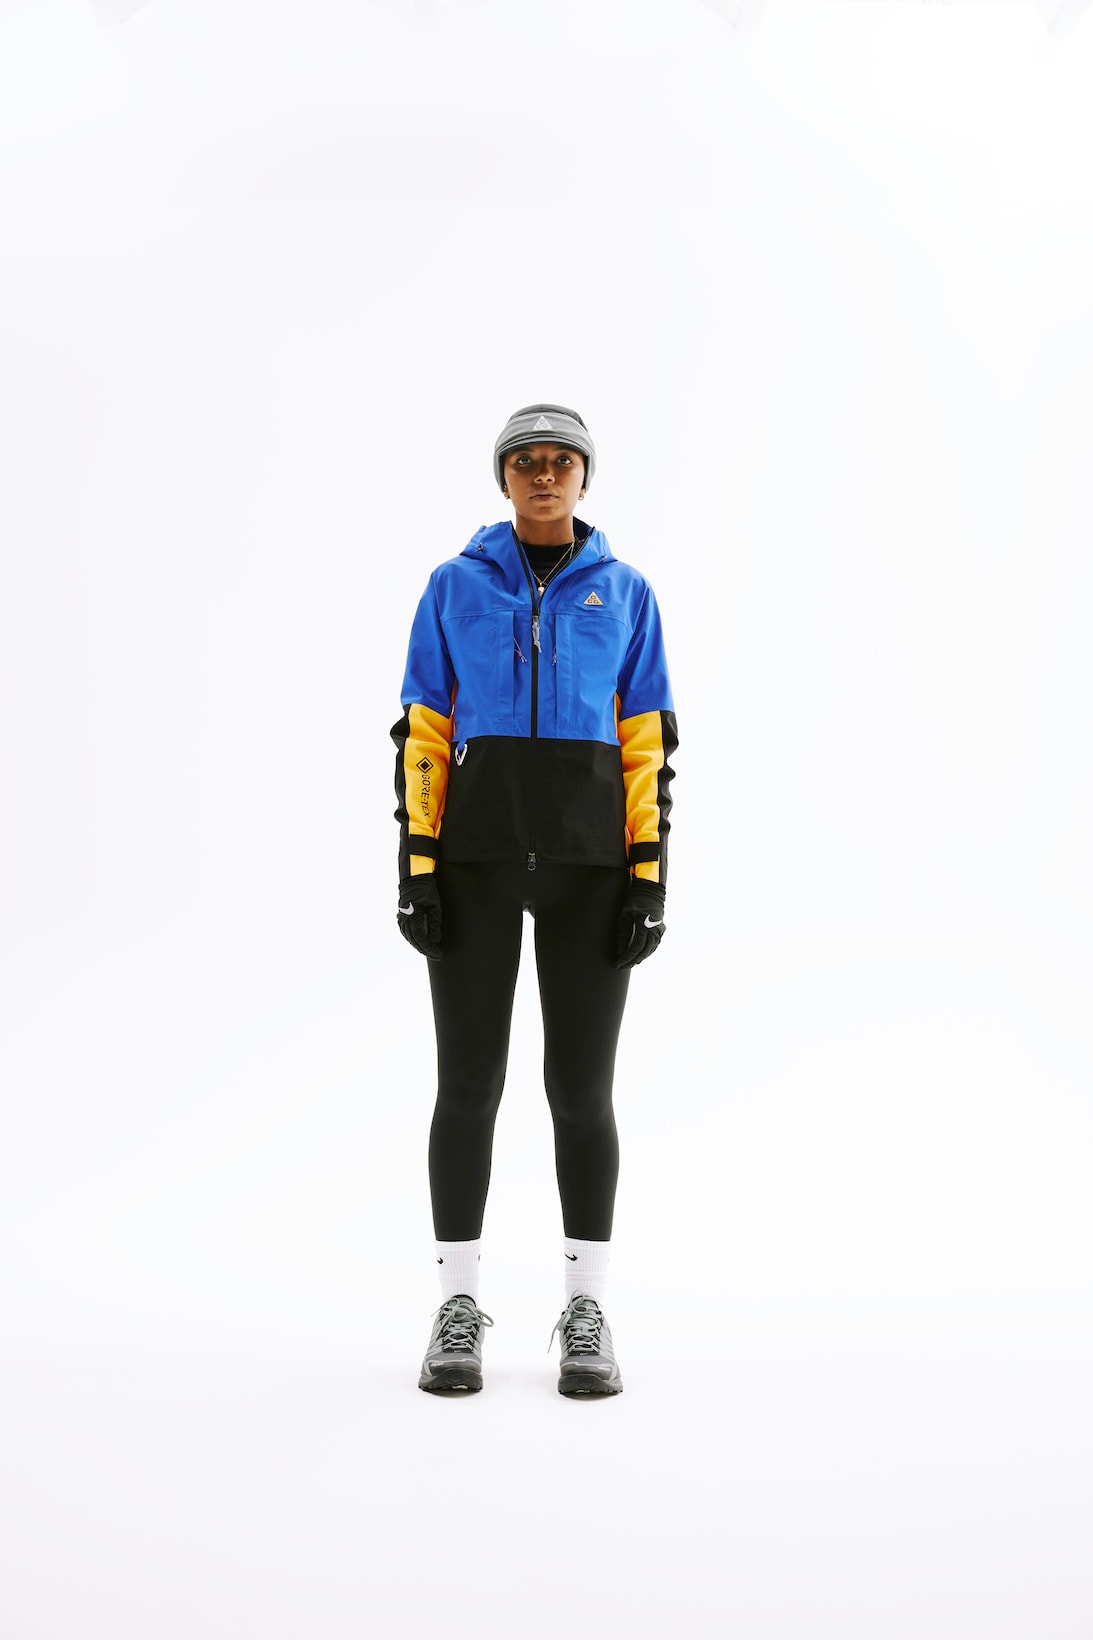 nike acg collection sivasdescalzo svd immersive virtual reality experience outerwear jacket hat leggings